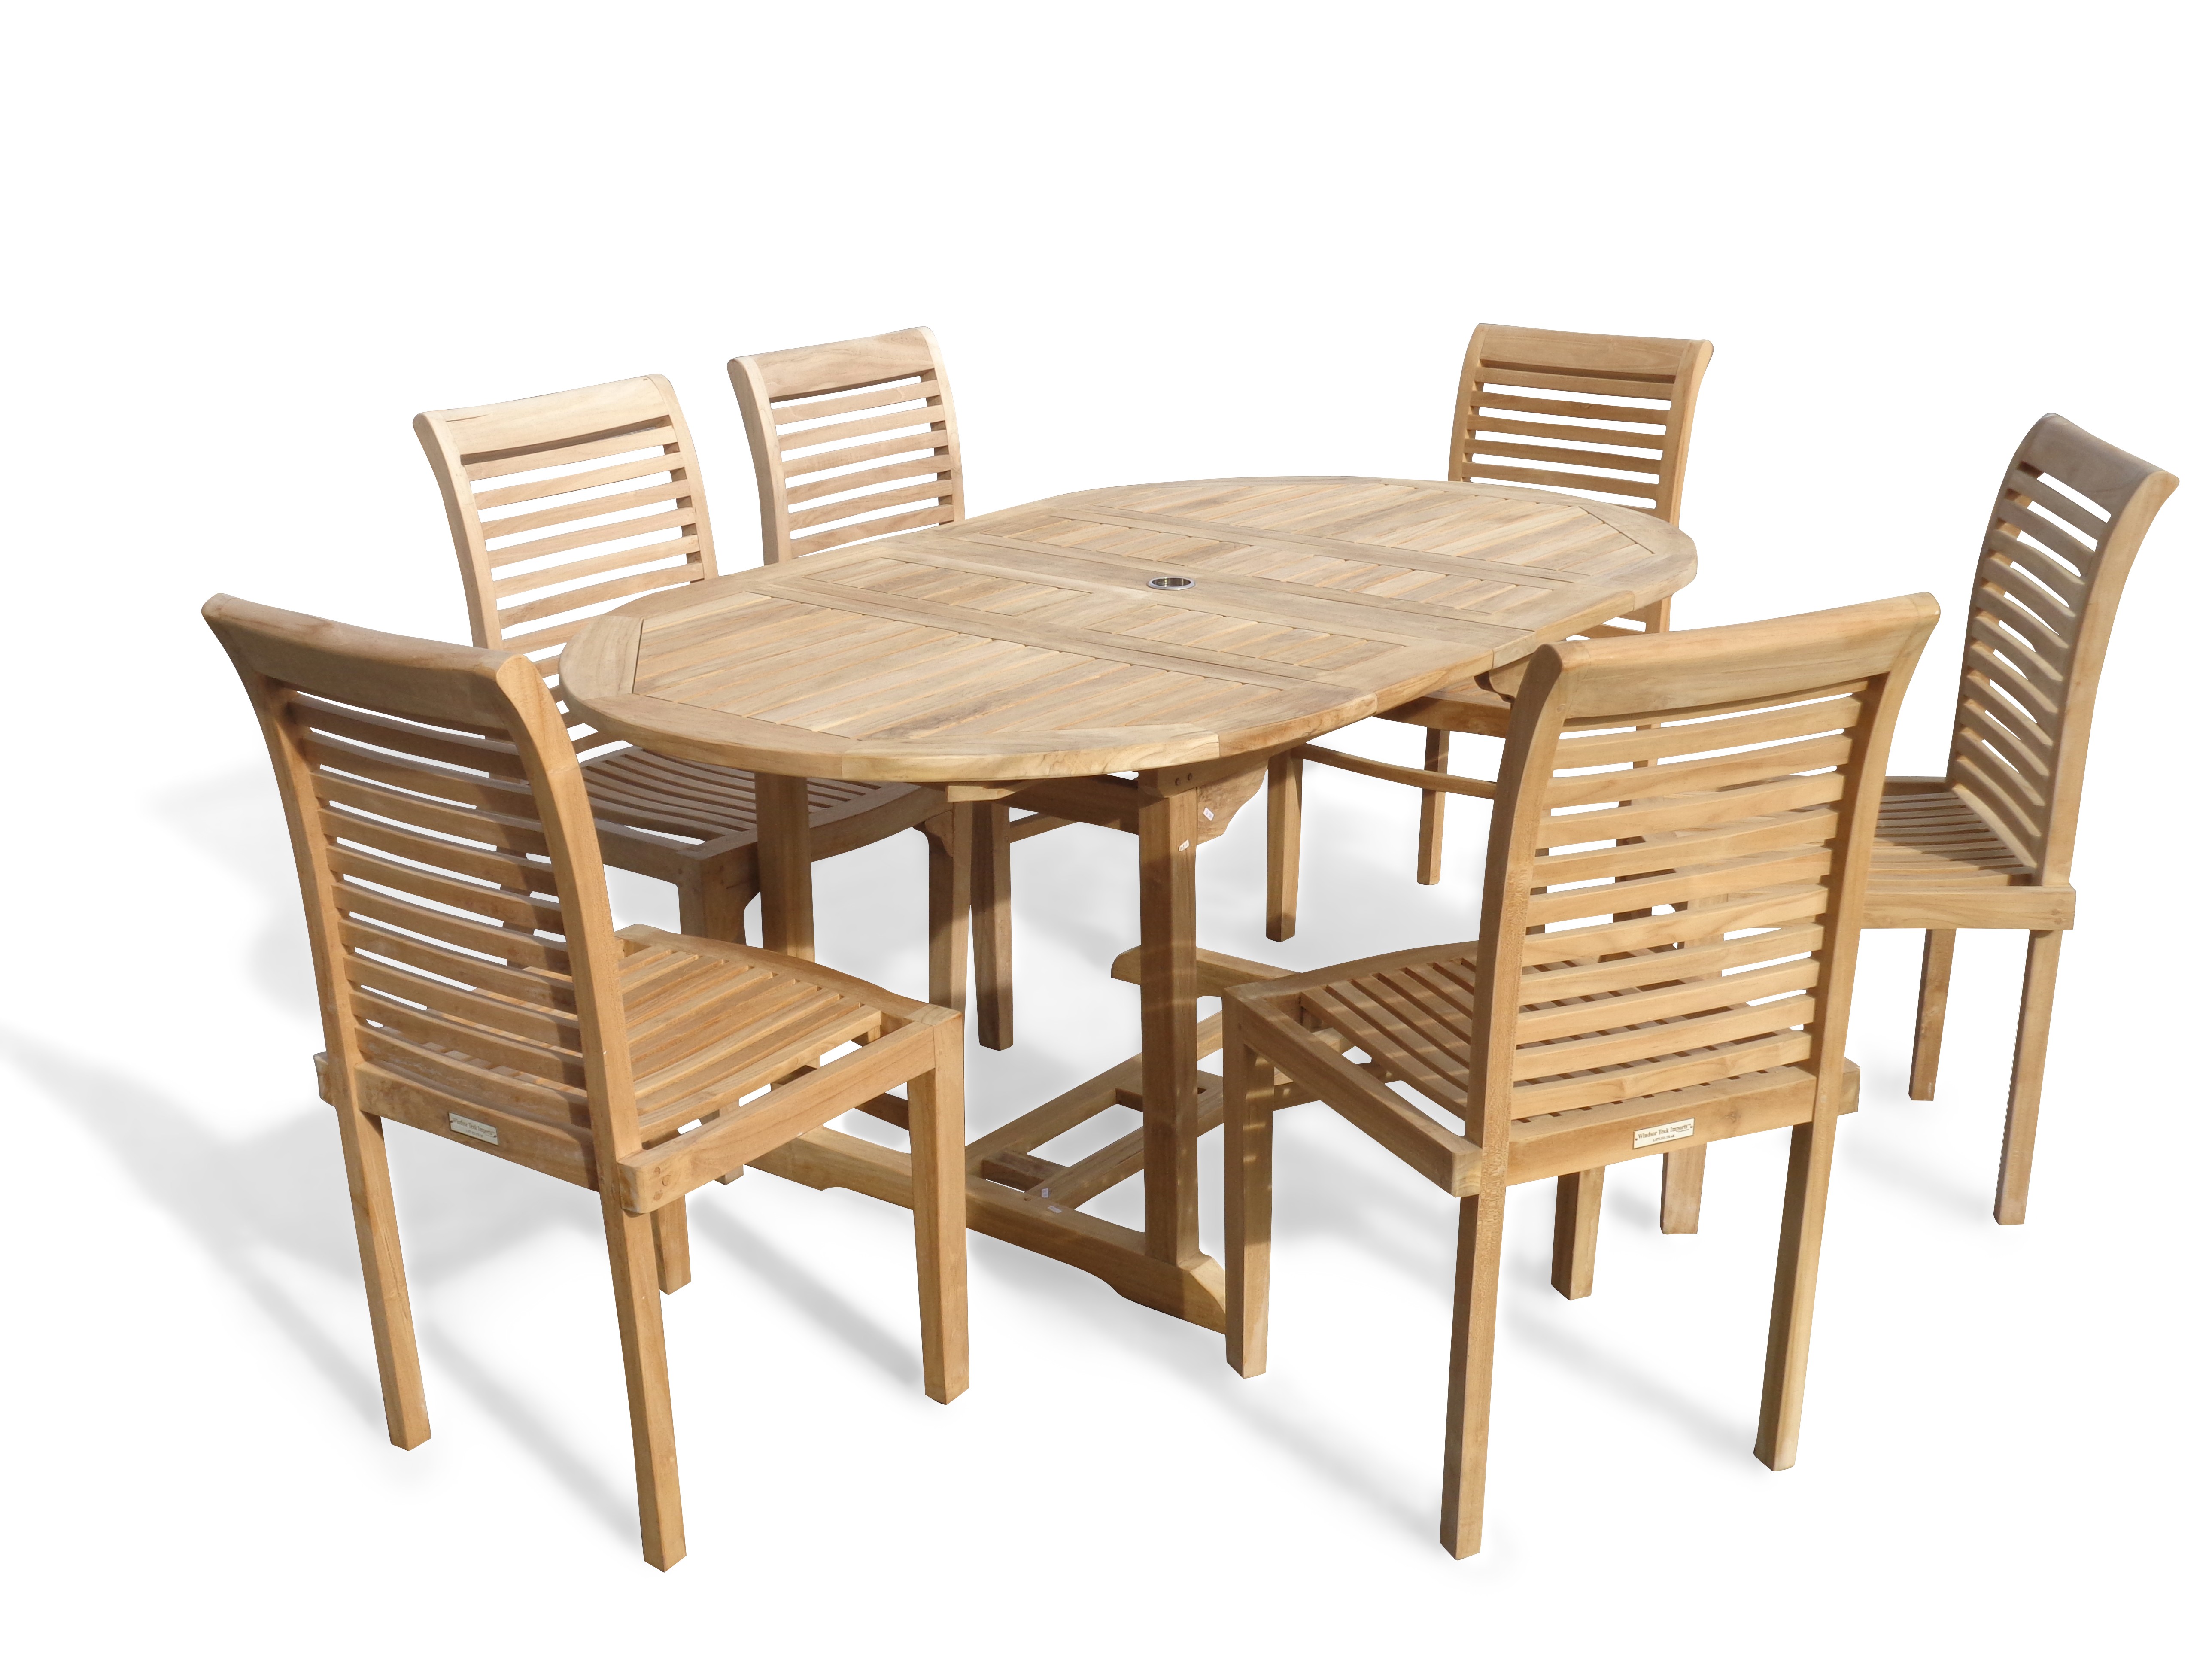 Buckingham 66" x 39" Double Leaf Oval Extension Teak Table W/6 Casa Blanca Armless Stacking Chairs.